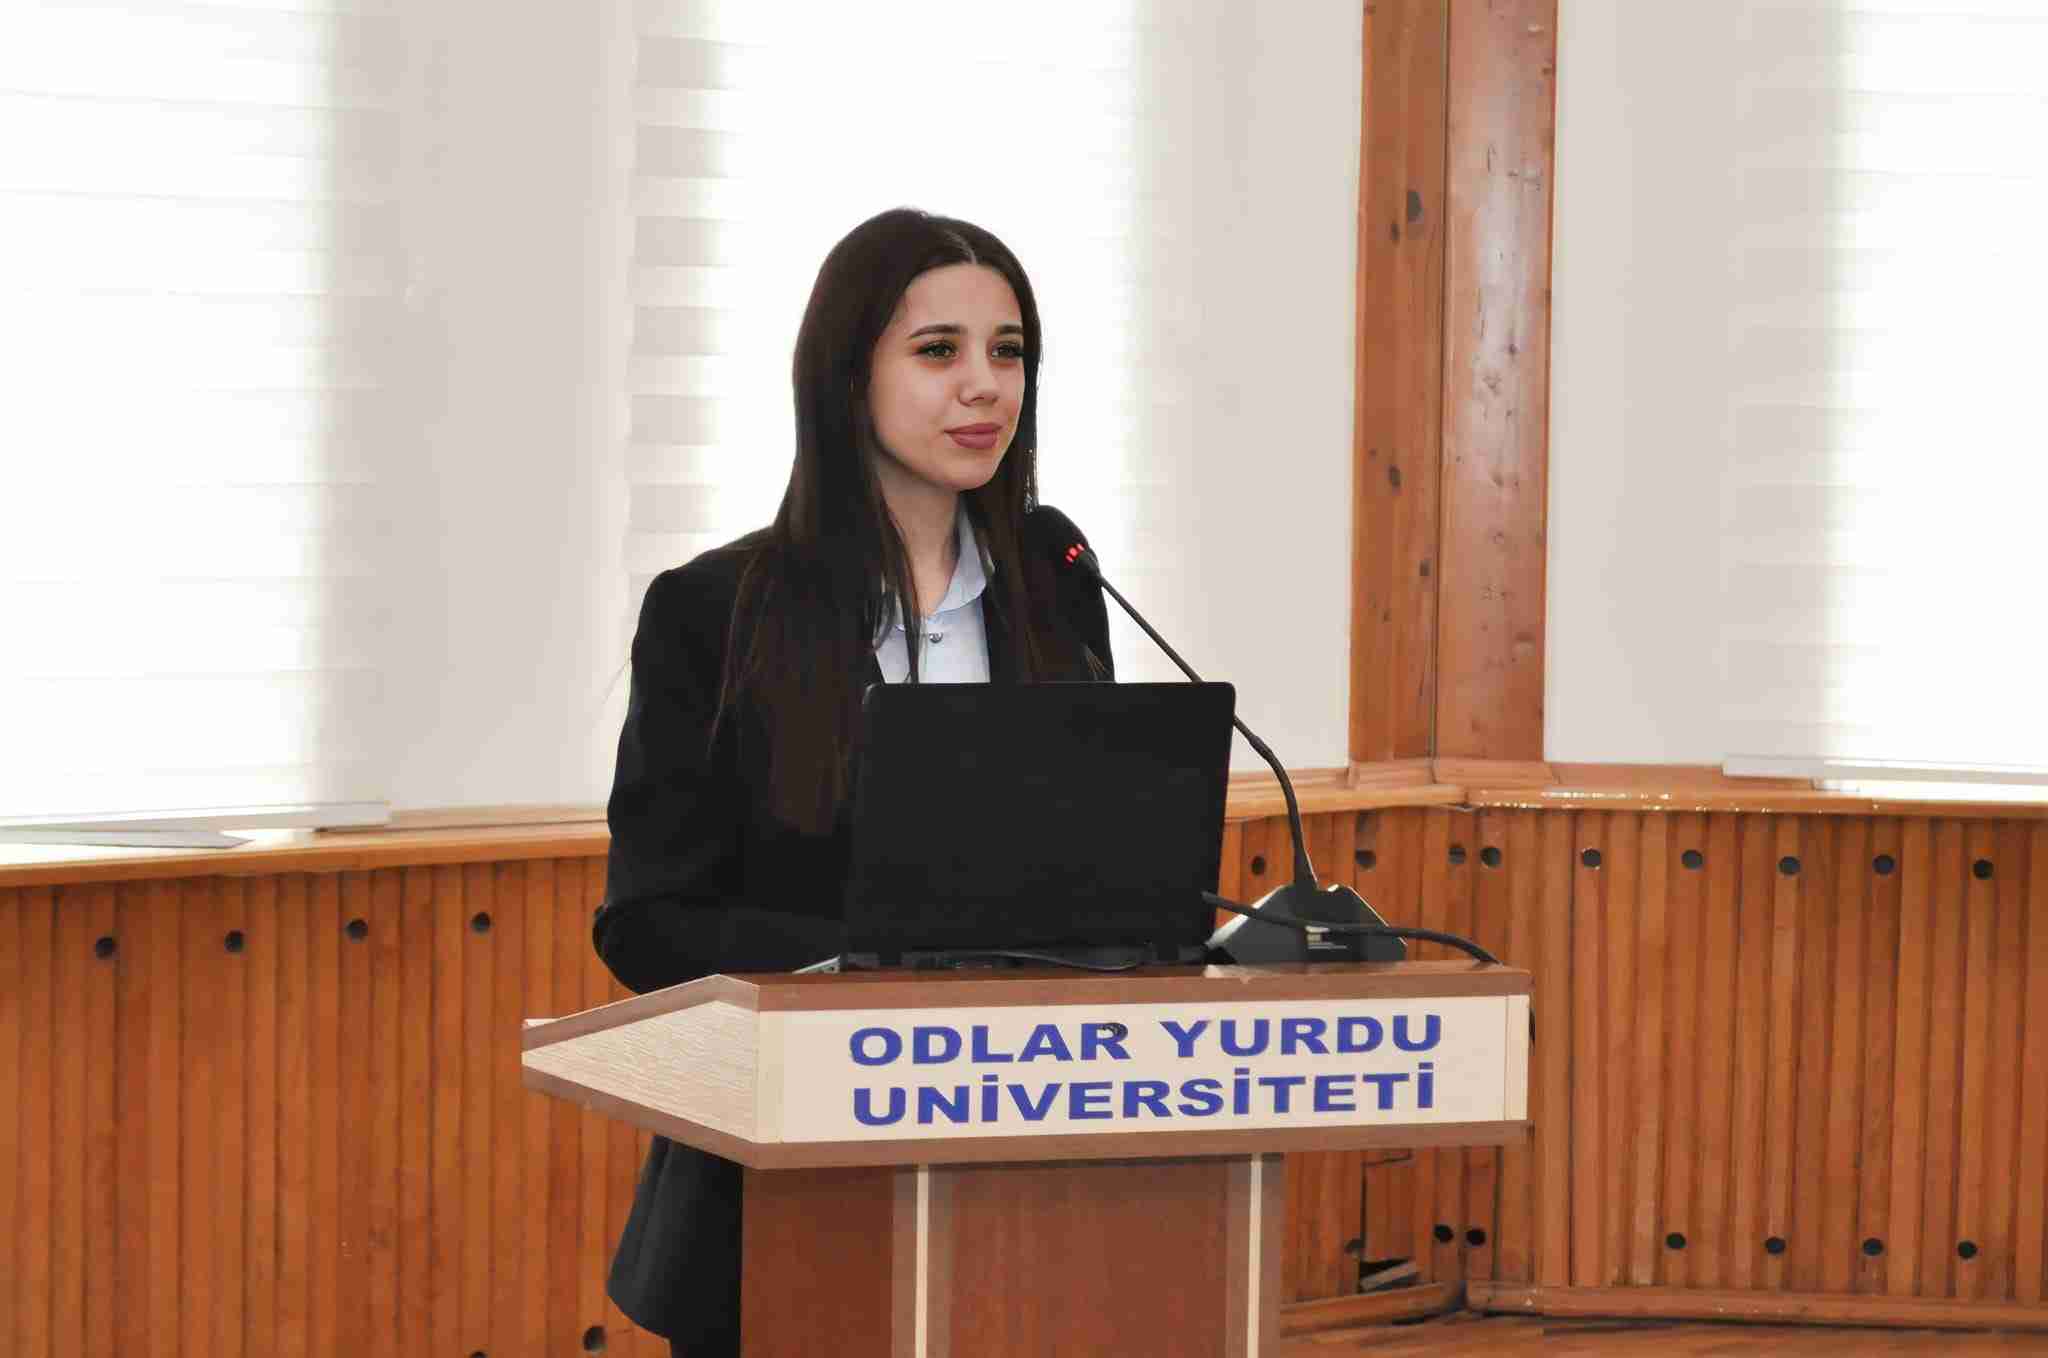 A training was organized for the students of the Department of Biology and Ecology at OYU